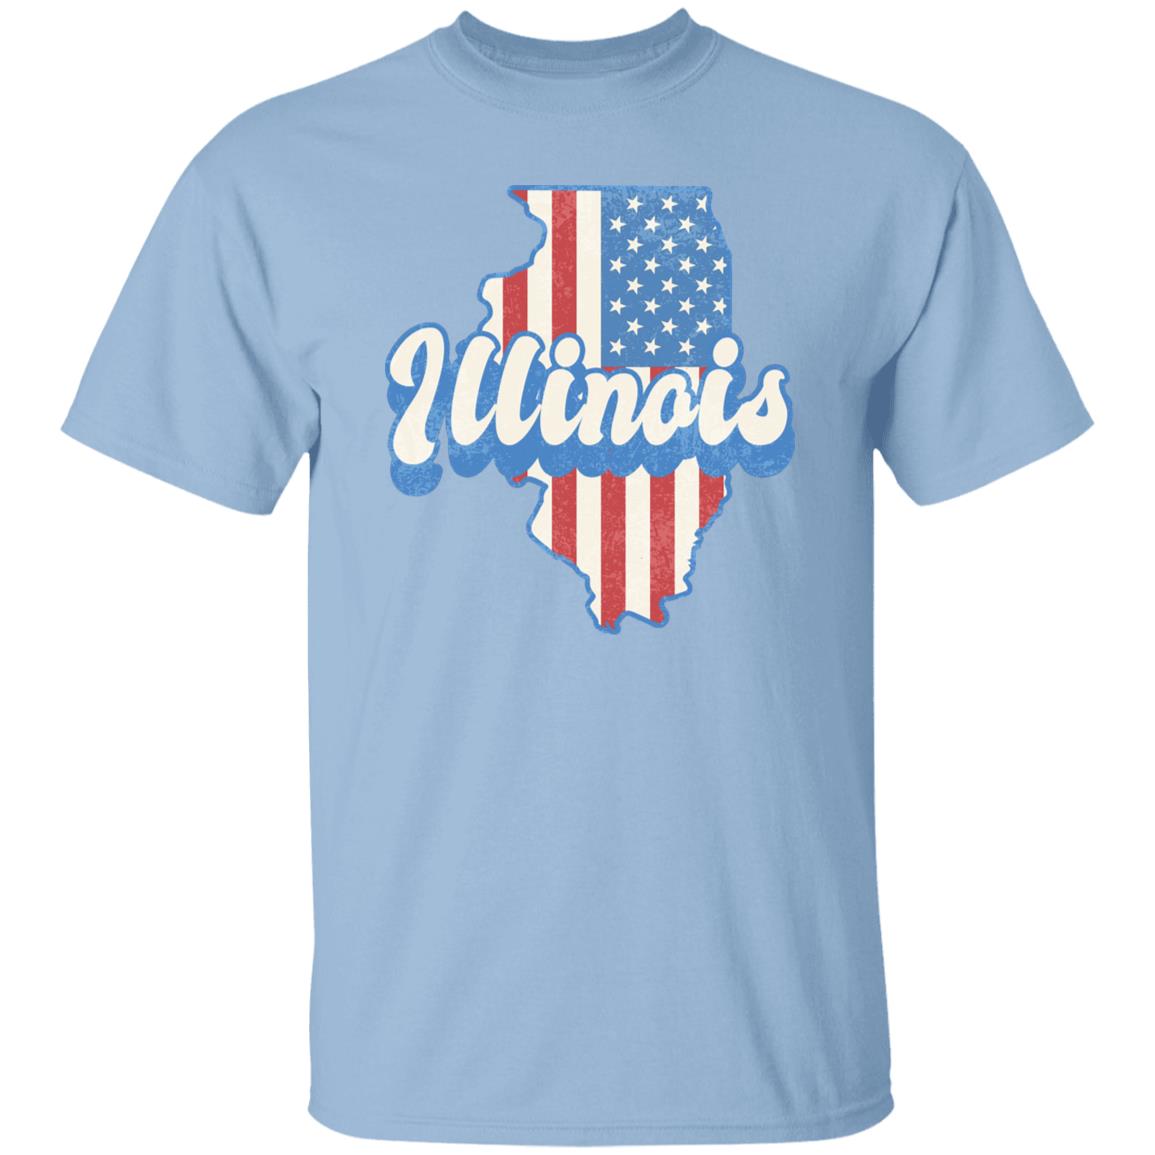 Illinois US flag Unisex T-Shirt American patriotic IL state tee White Ash Blue-Light Blue-Family-Gift-Planet